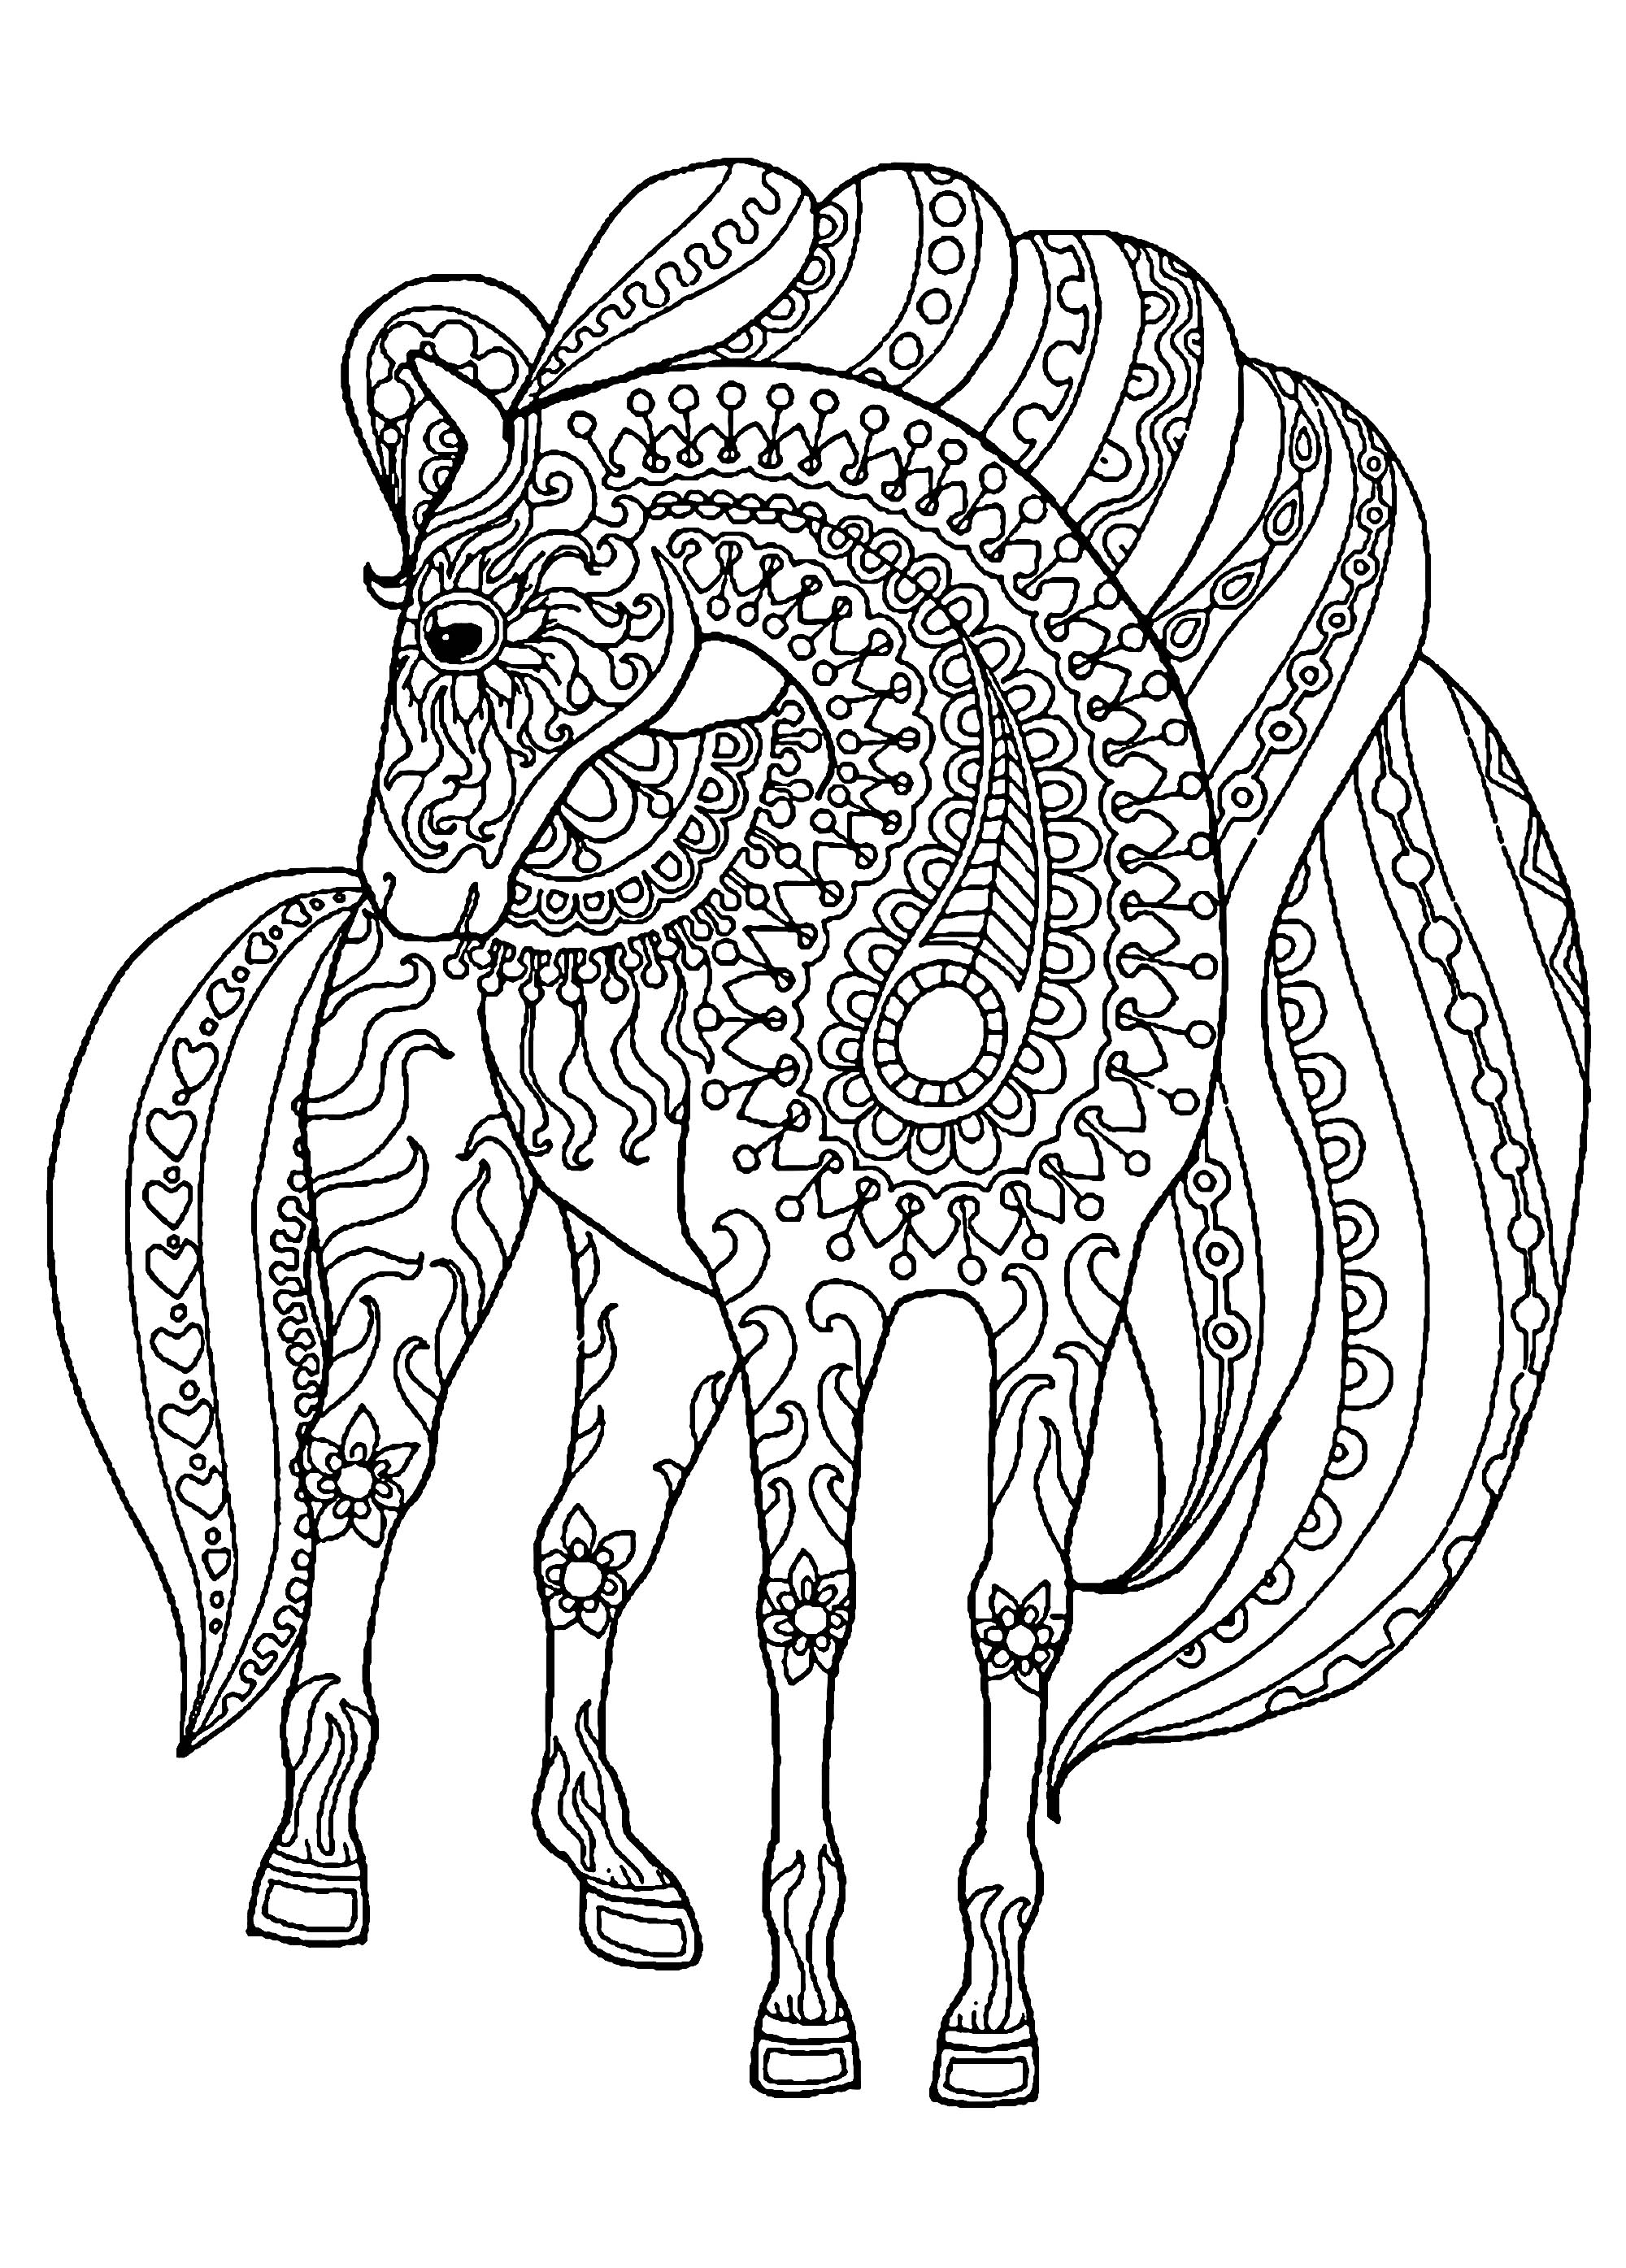 Download Horse with patterns free to color for children - Horses ...